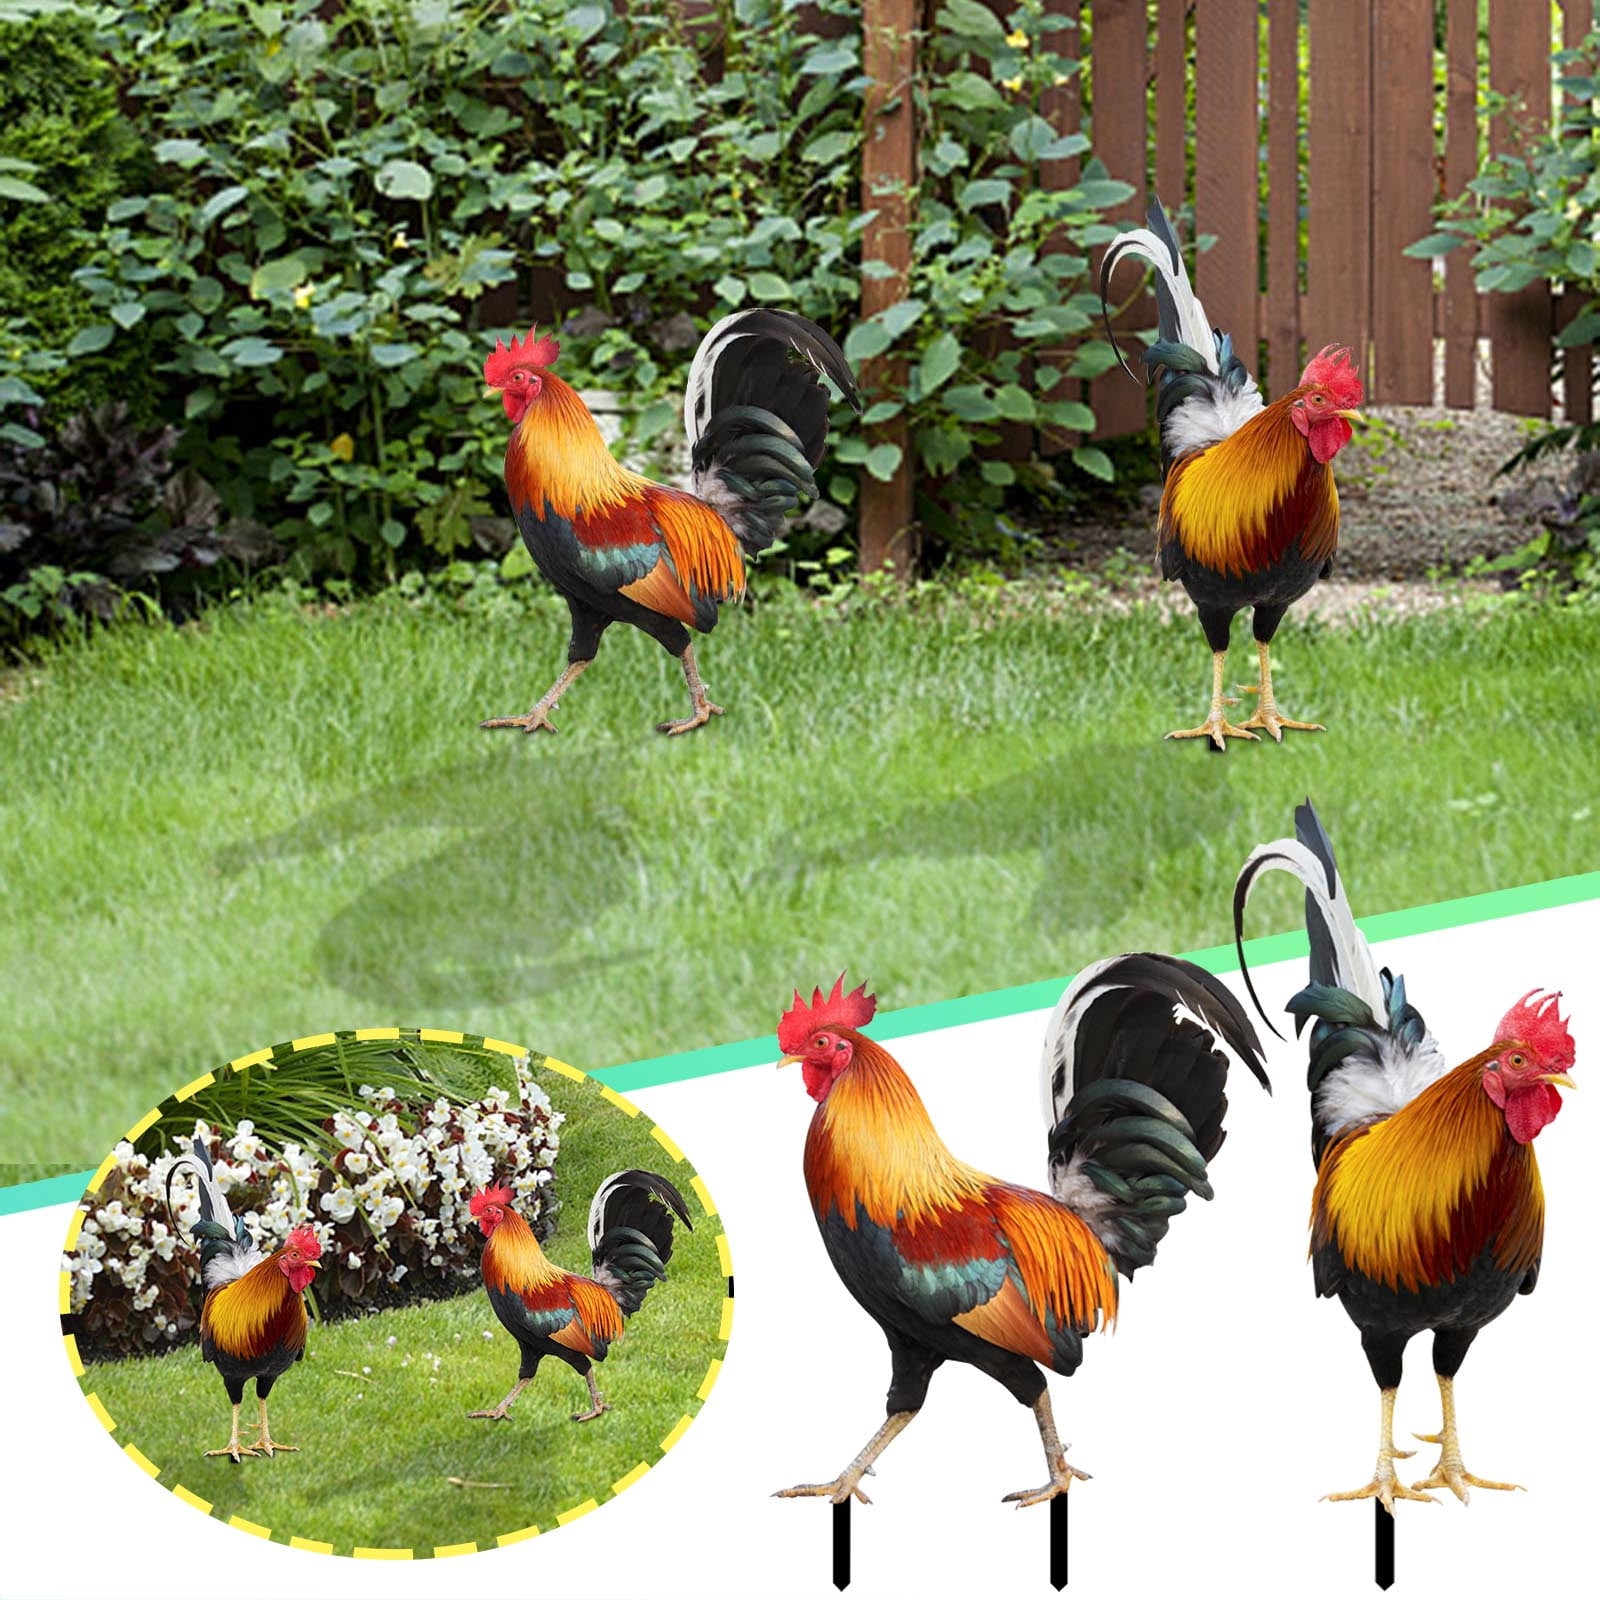 Chicken Yard Art Acrylic Decorative Garden Stakes-Hen and Chicks Statues  Idea Chicken Gifts for Garden Decor,Patio,Outdoor - Set of 5 Animal Lawn  Decorations - Walmart.com